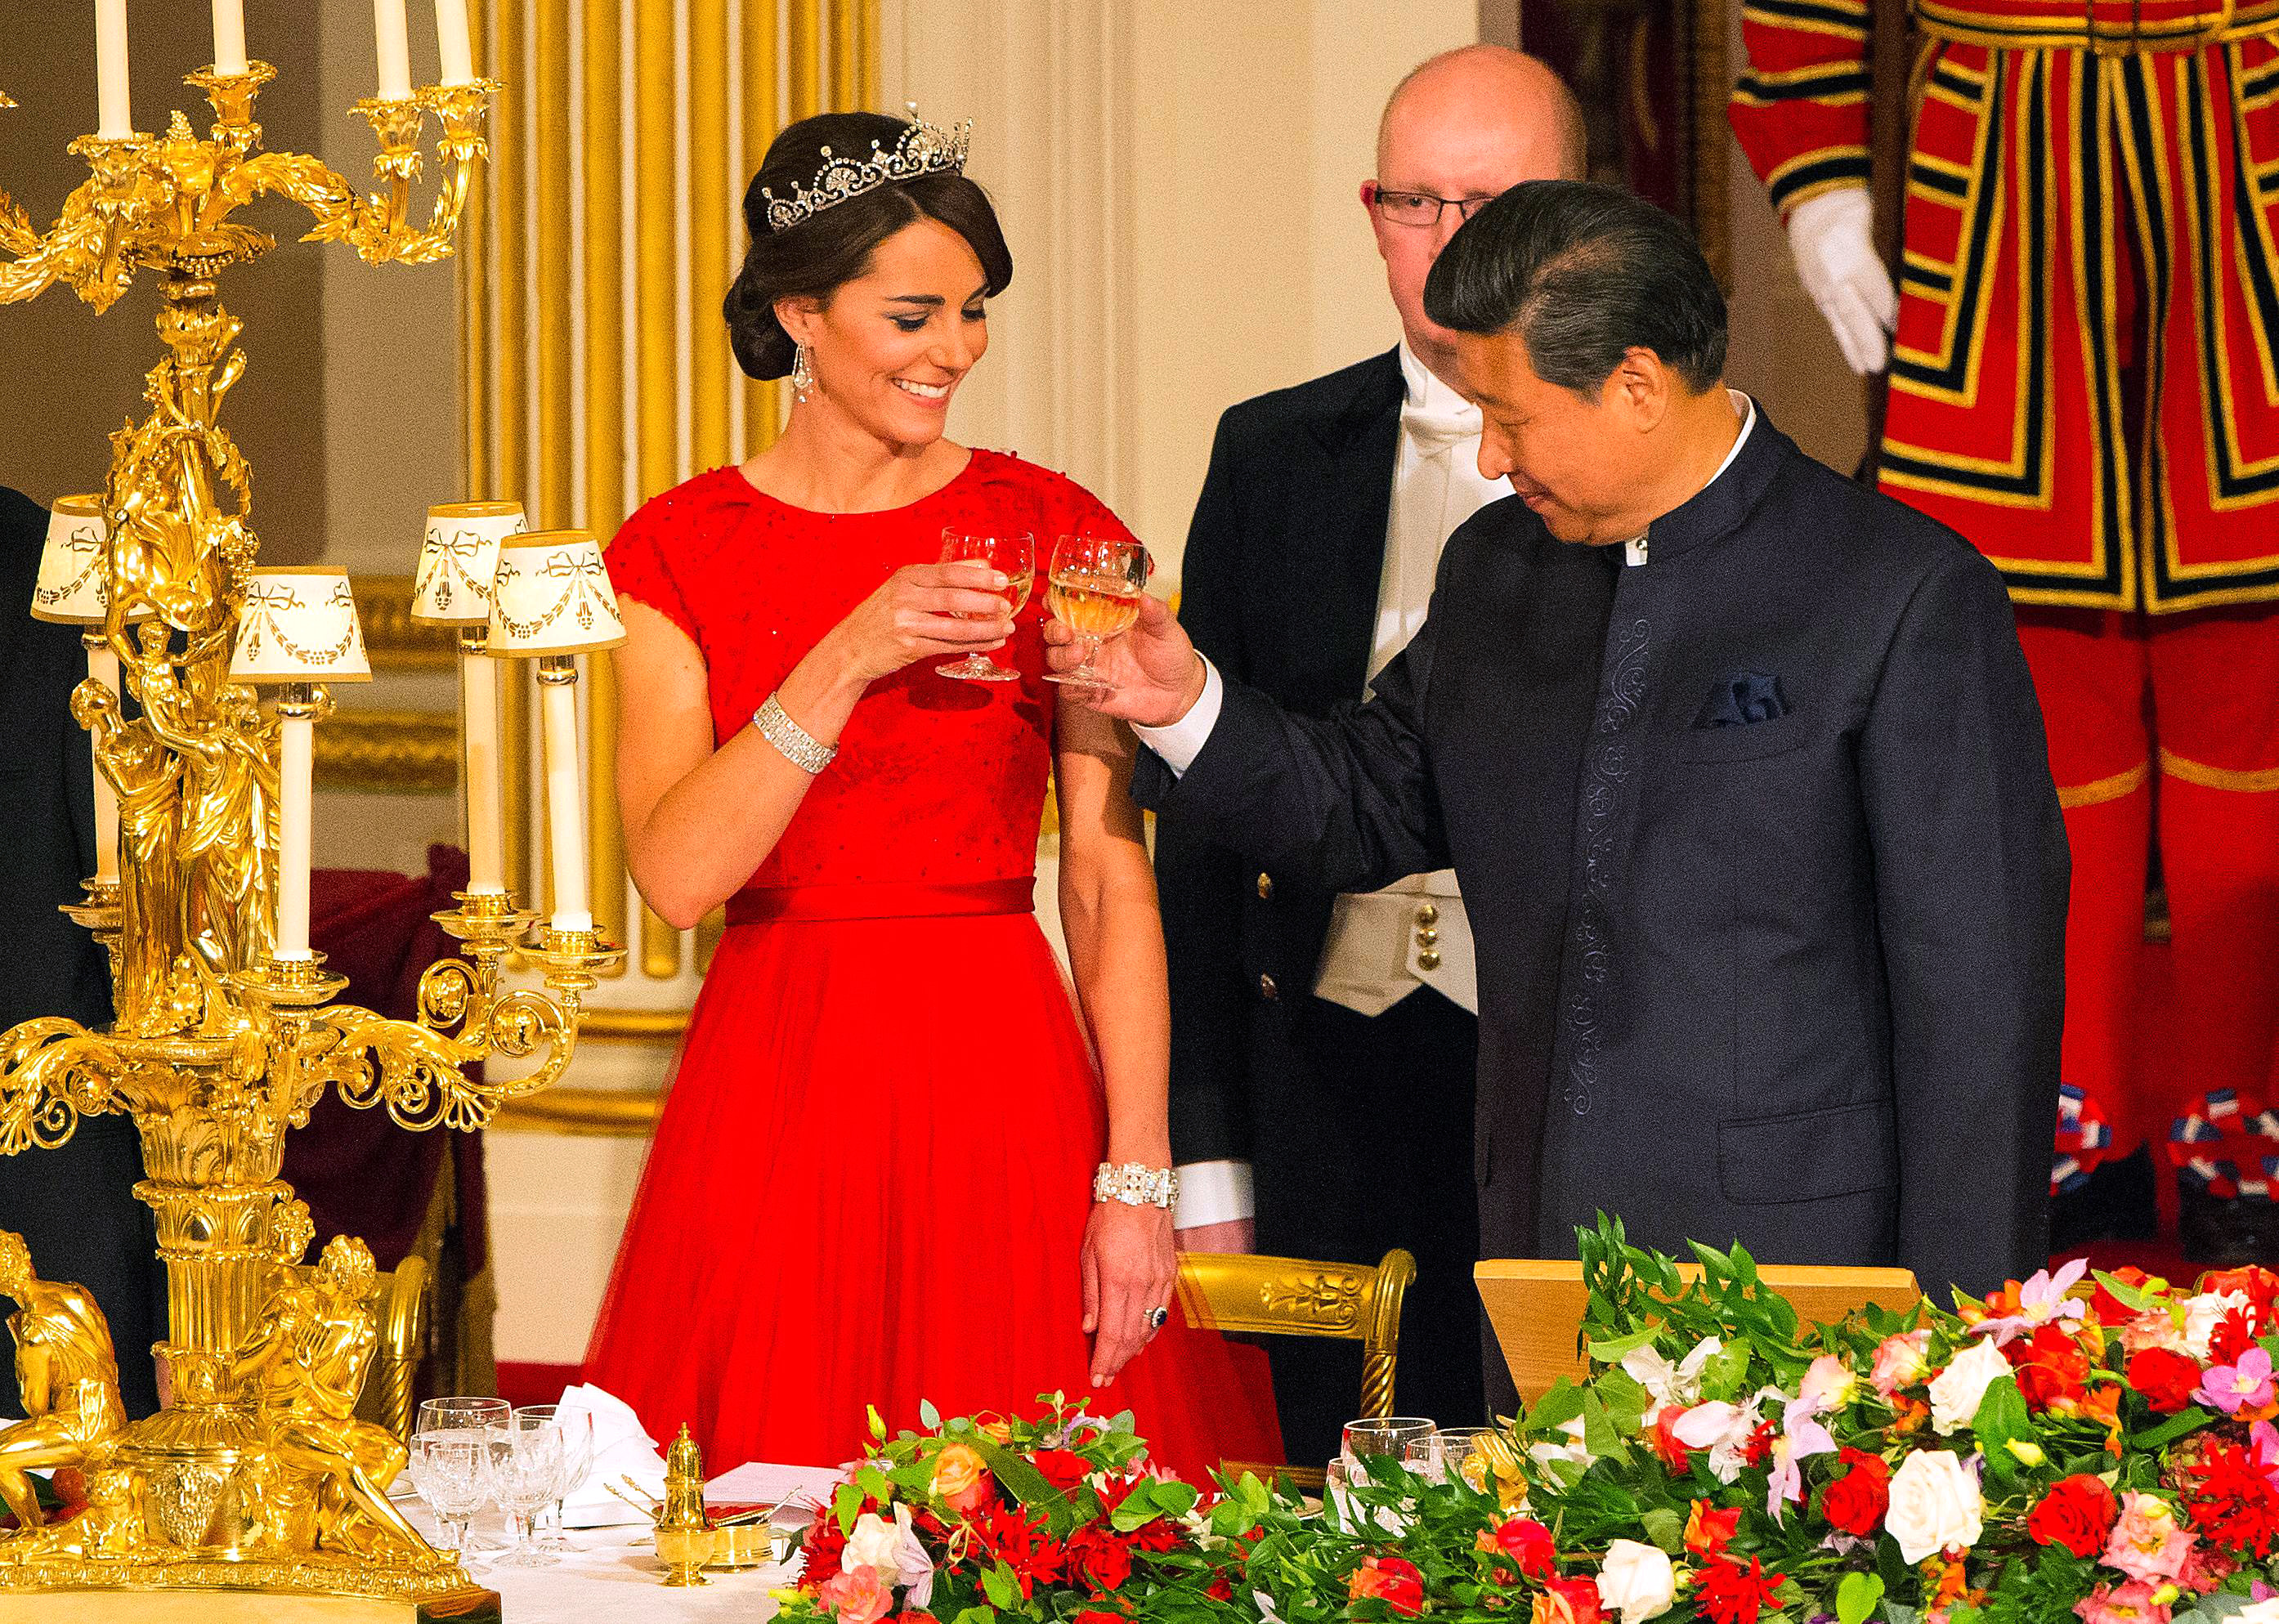 Chinese President Xi Jinping (right) raises a glass with Kate Middleton, Duchess of Cambridge, during the State Banquet hosted by Britain's Queen Elizabeth II at Buckingham Palace. Photo: AFP